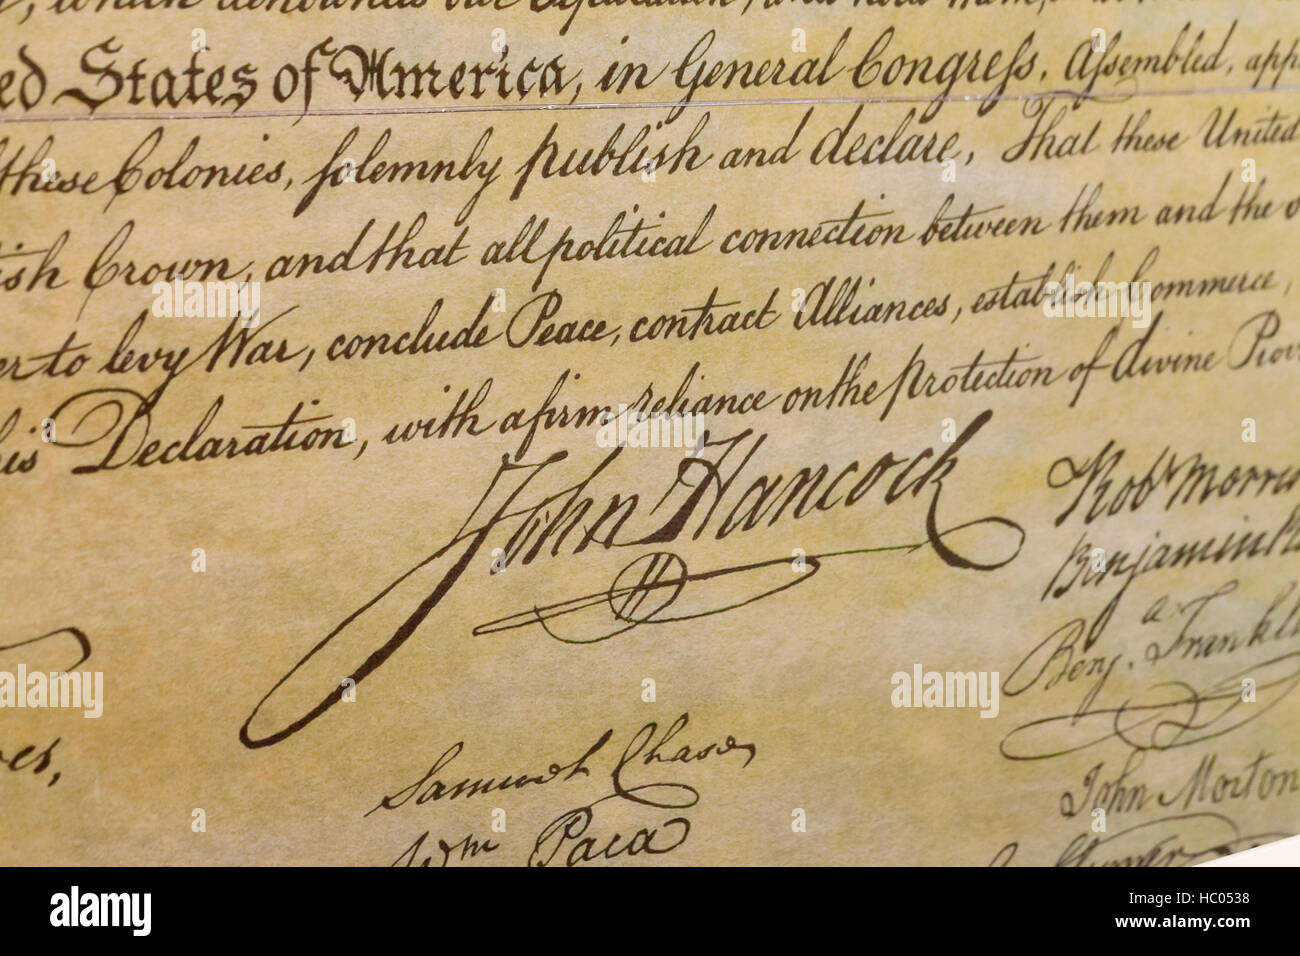 John Hancock Signature As Shown On The Engrossed Copy Of The Us Declaration Of Independence